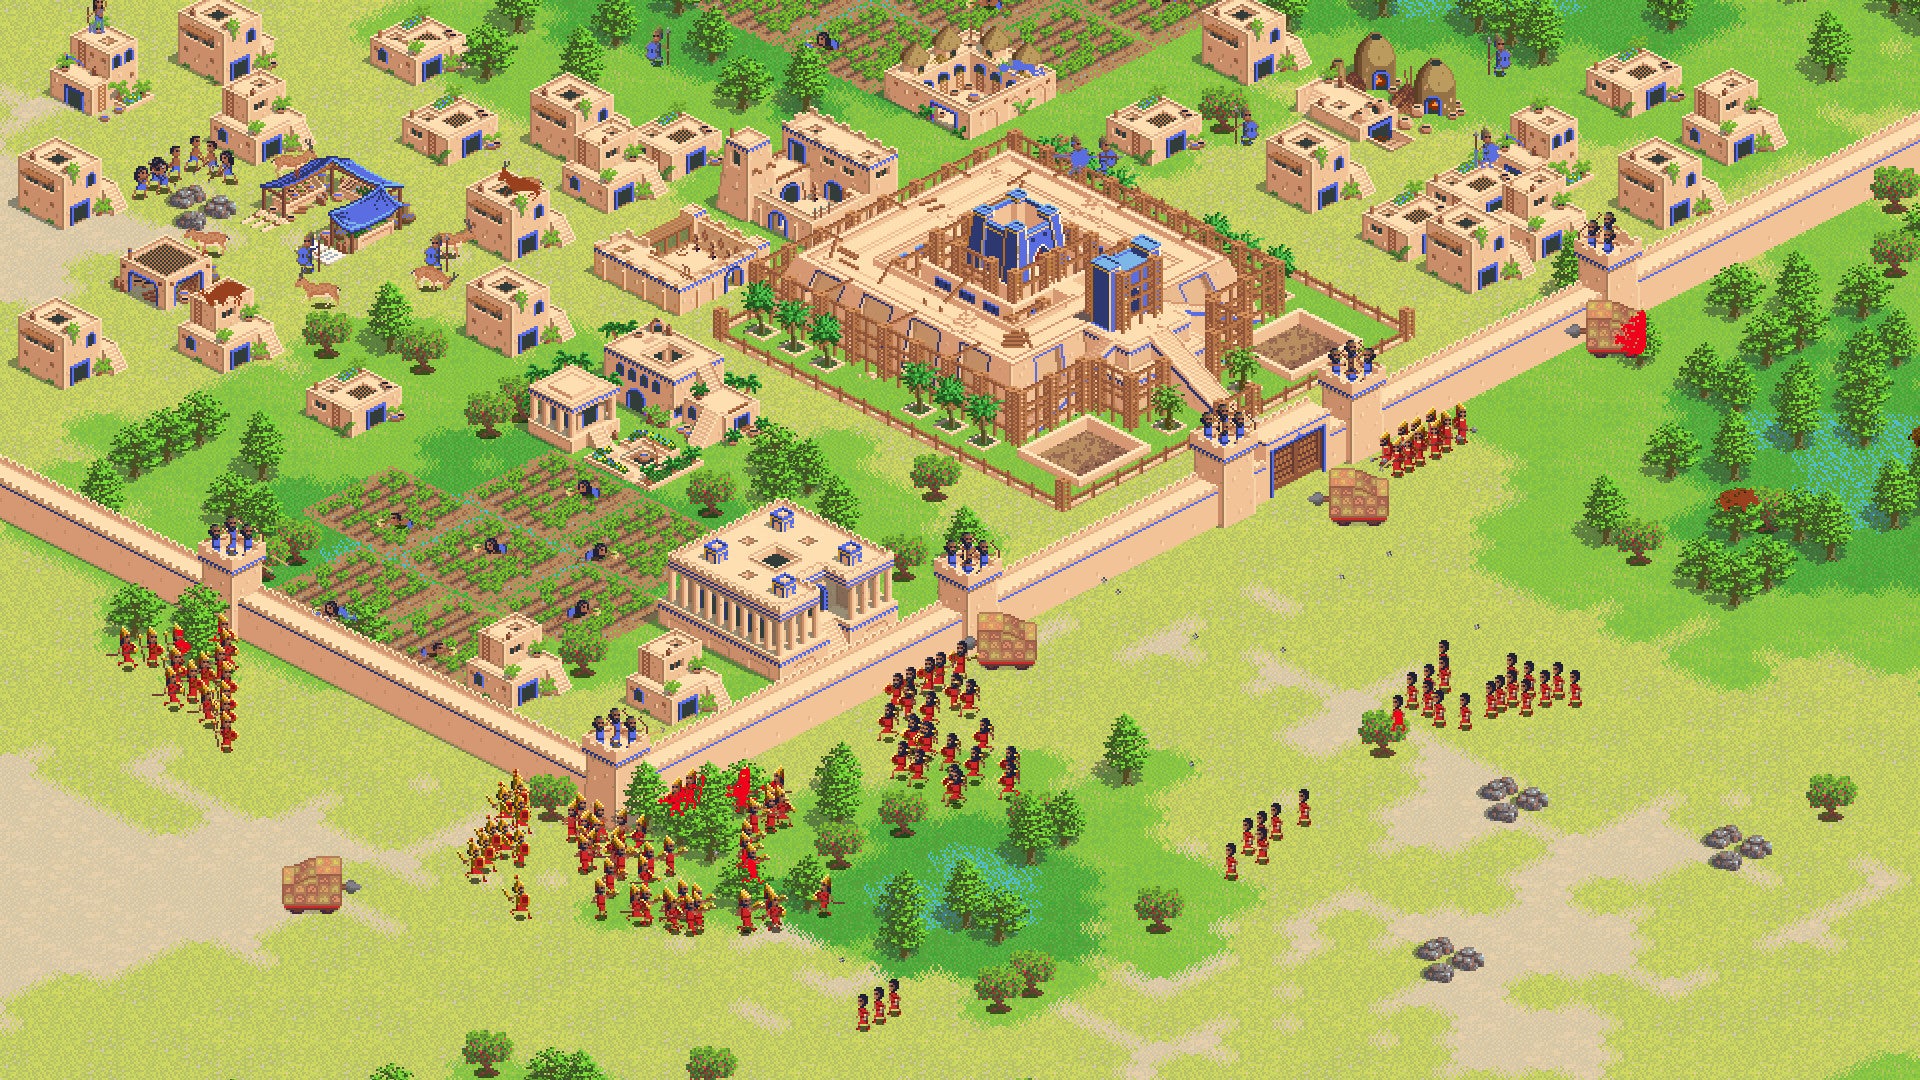 An isometric, top-down view of an ancient civilization in The Fertile Crescent